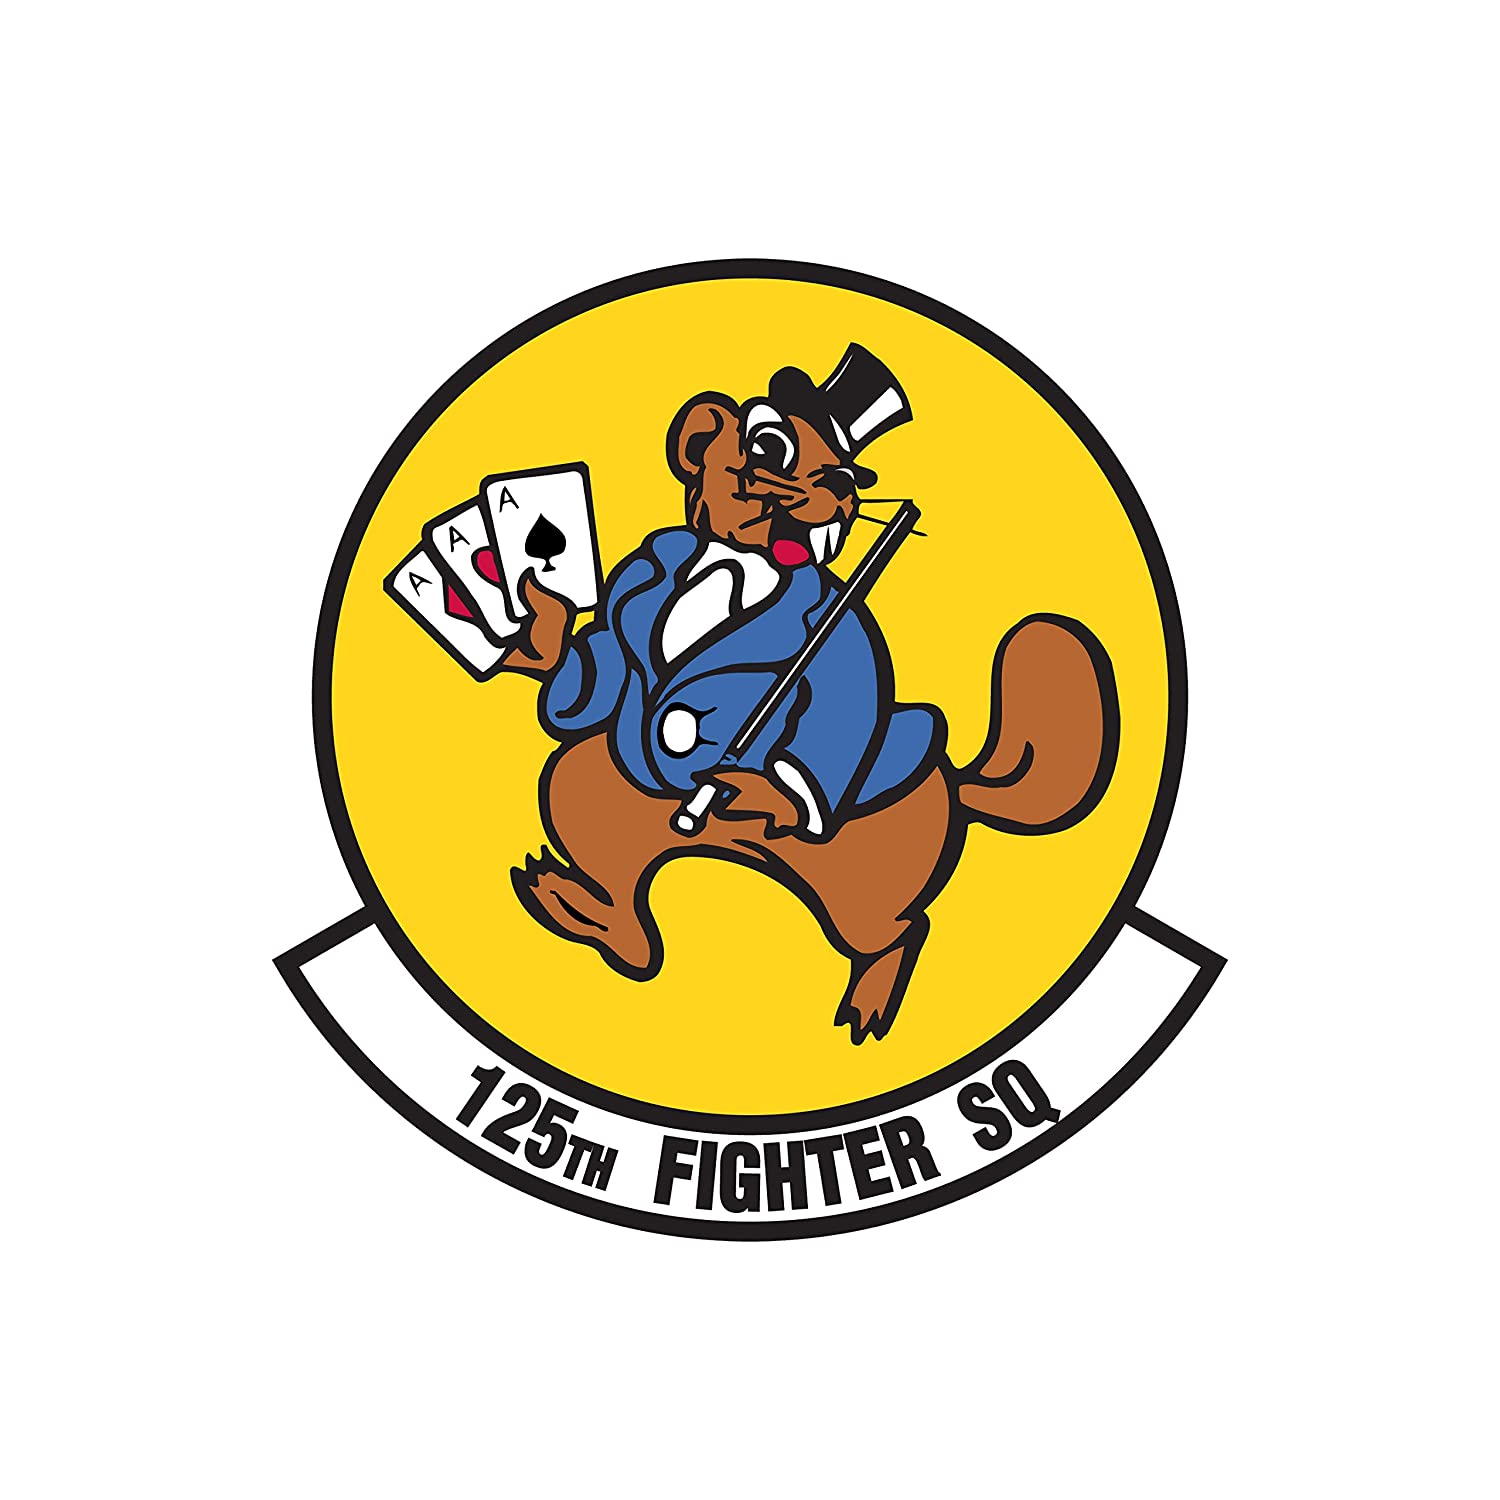 125th Fighter Squadron - Patch Vinyl Decal - Available in Multiple Sizes